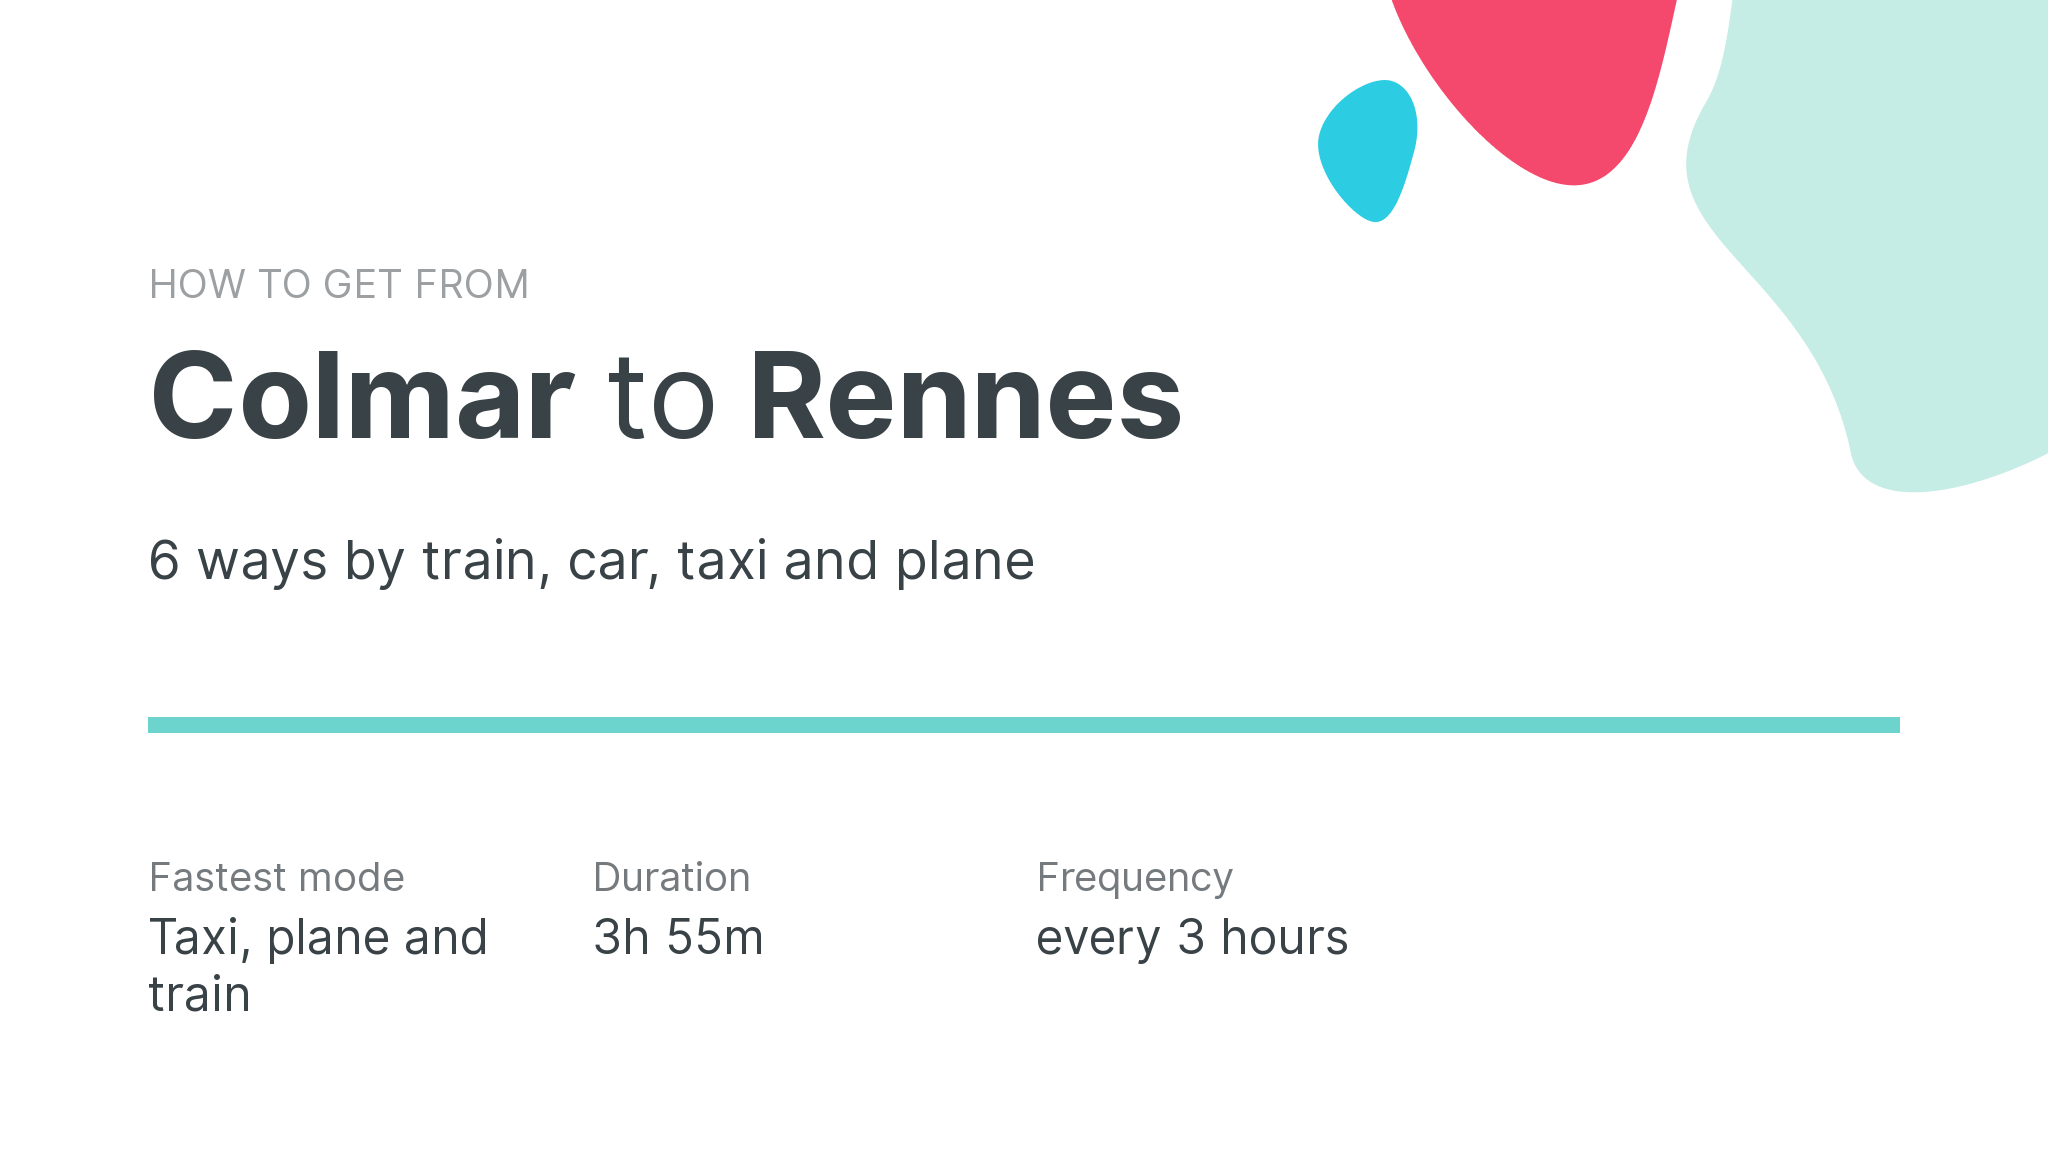 How do I get from Colmar to Rennes